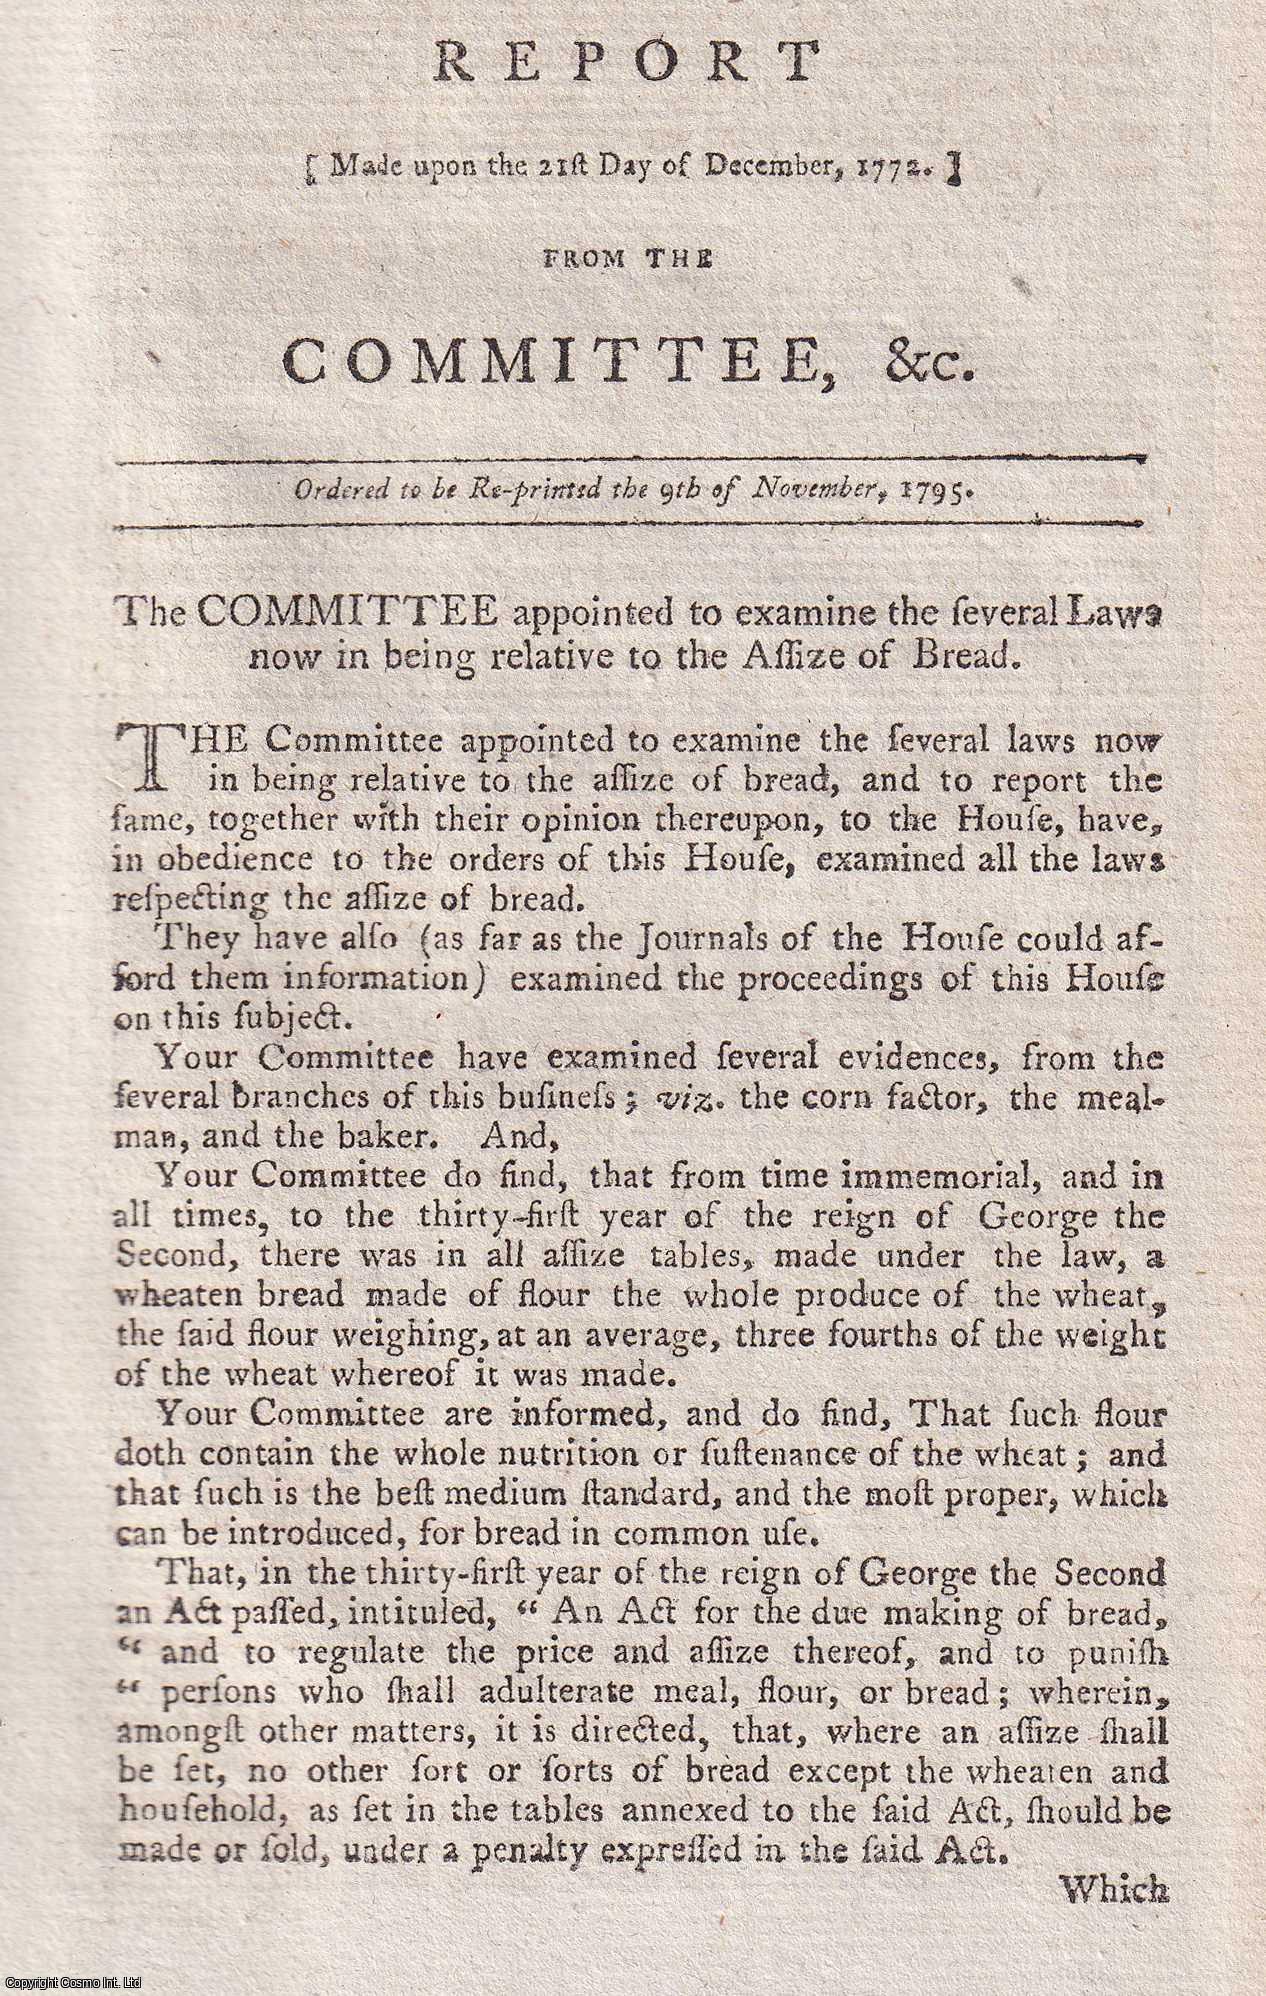 Bread Prices - 1795 Flour; The Committee appointed to examine the several Laws now in being relative to the Assize of Bread. From Woodfall's Impartial Report of the Debates that Occur in the Two Houses of Parliament, 1795.